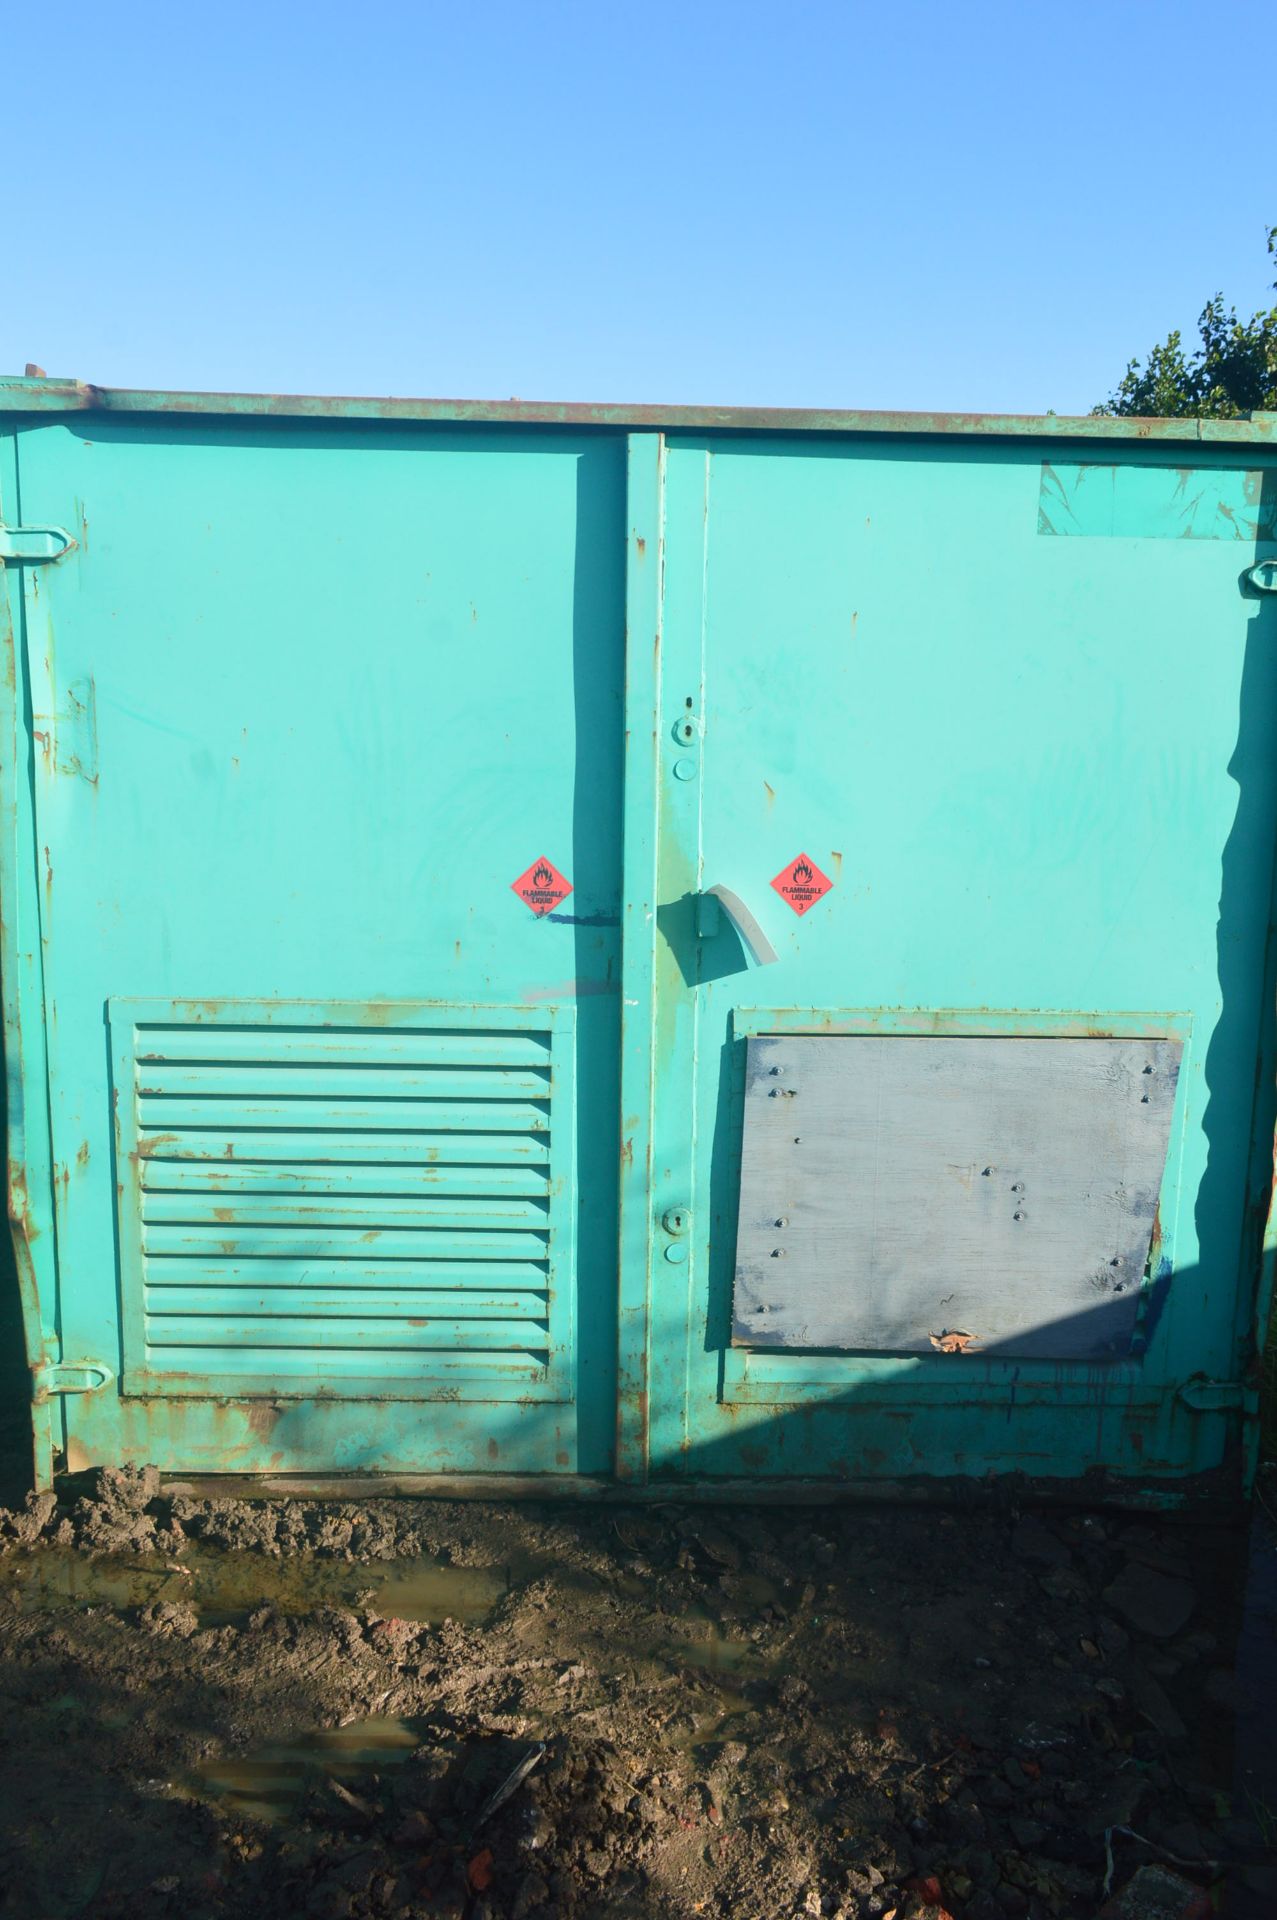 Steel Welfare Cabin, approx. 7.5m x 2.8m x 2.4m high (understood to contain a generator) (no key) (